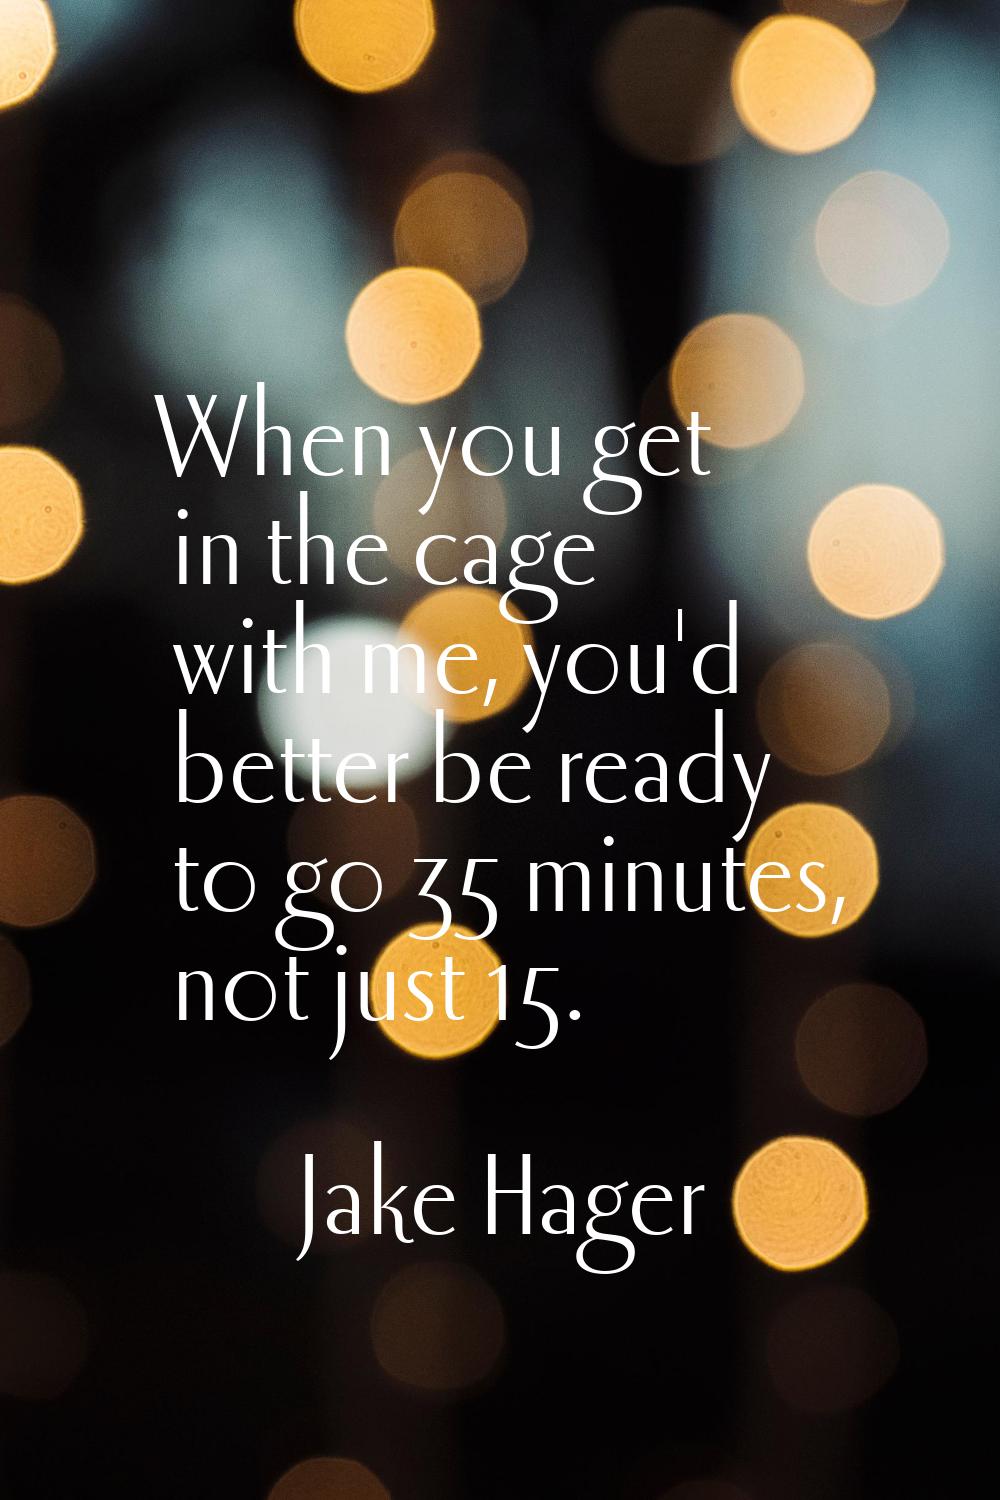 When you get in the cage with me, you'd better be ready to go 35 minutes, not just 15.